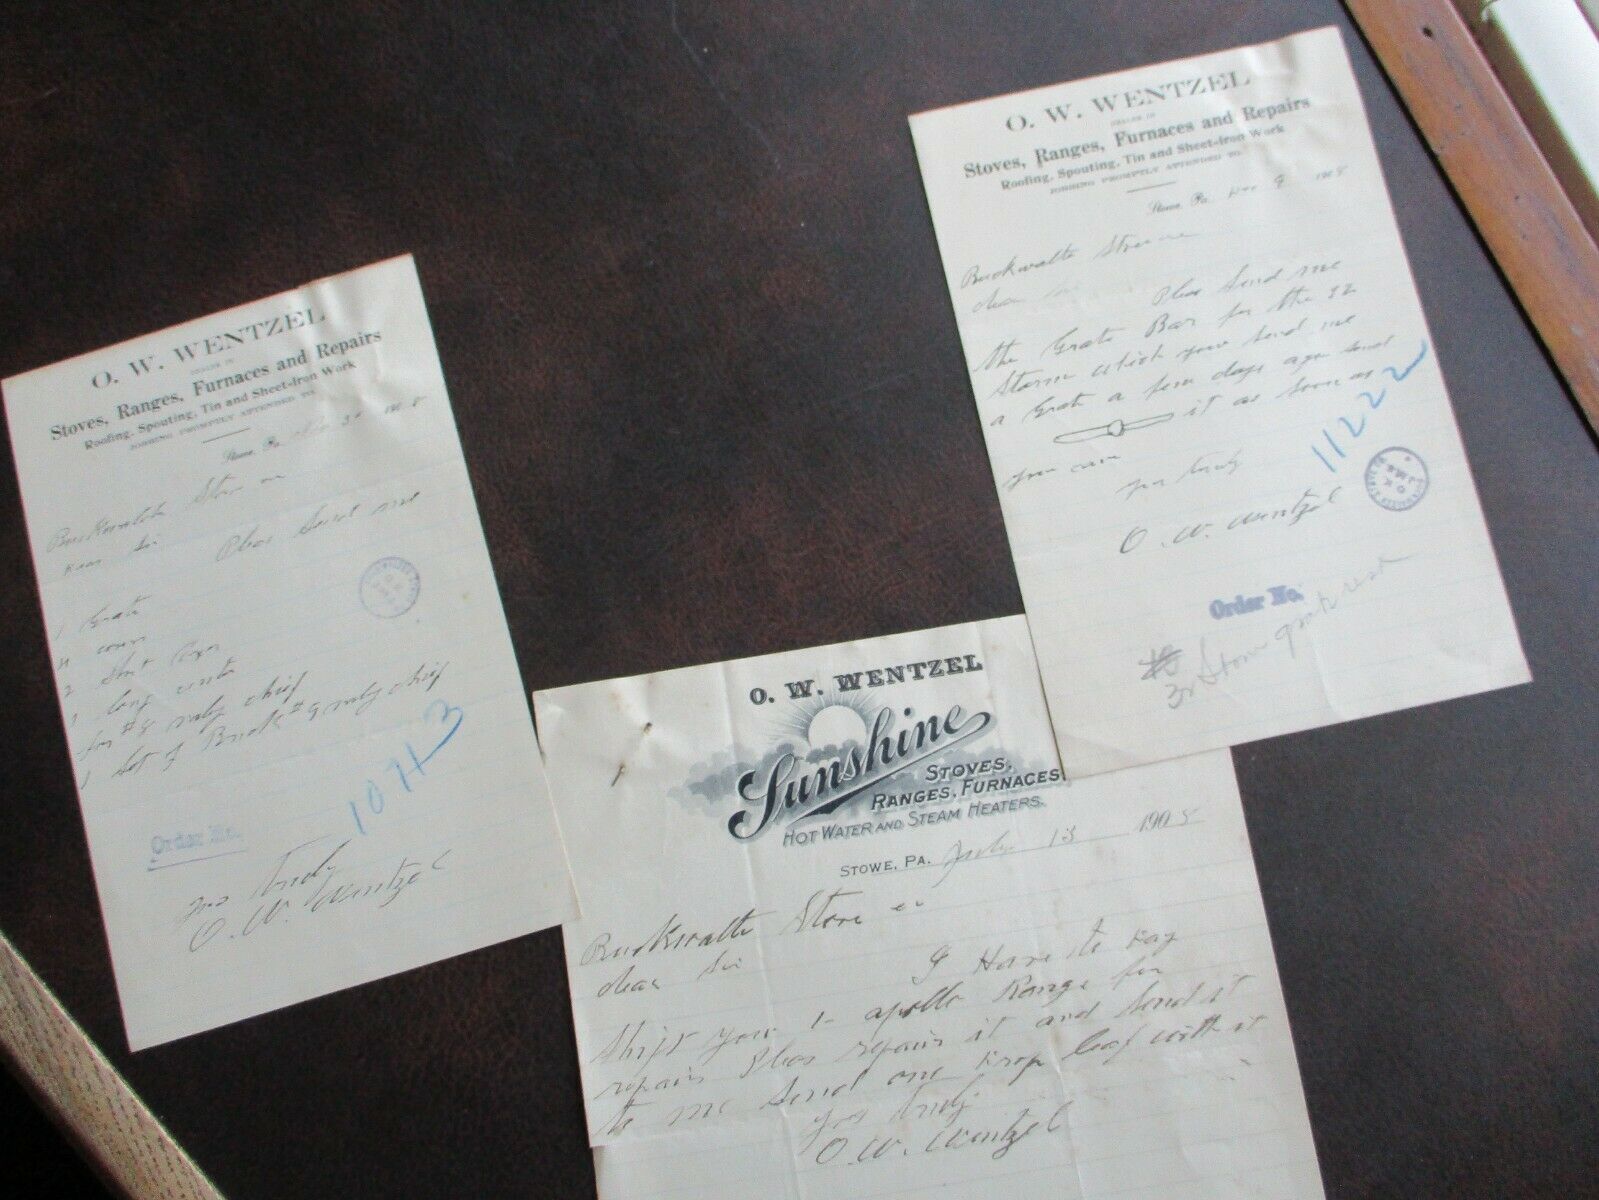 1908 (3) Stowe,pa., O.w. Wentzel Signed Handwritten Graphic Stove Letter Lot